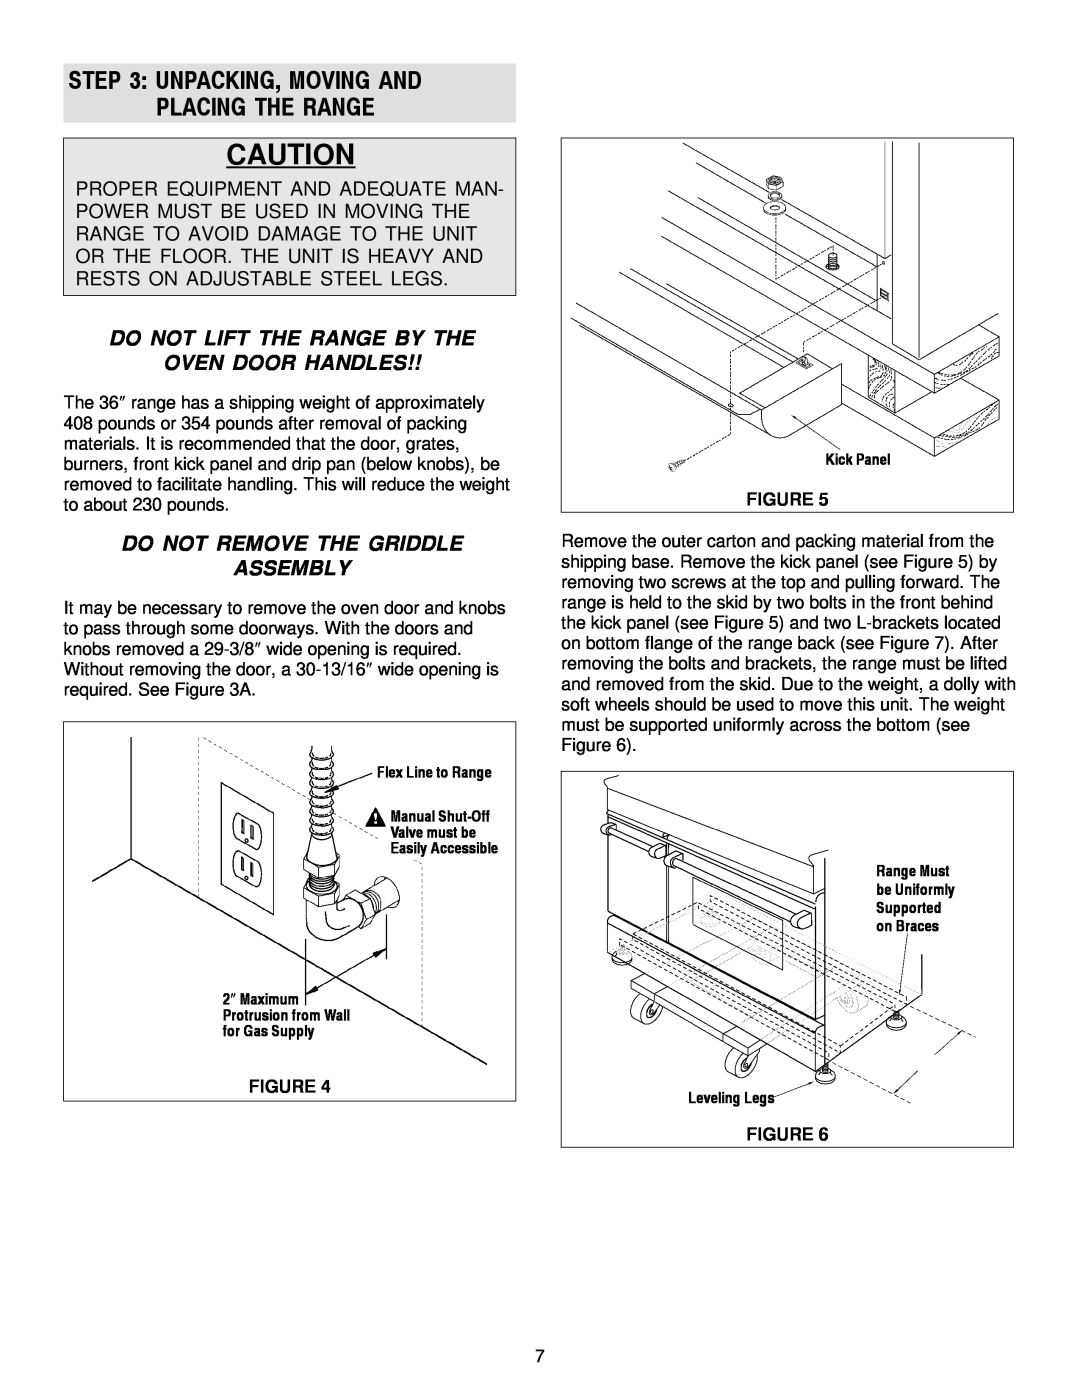 Jenn-Air 30, 36 manual Do Not Lift The Range By The Oven Door Handles, Do Not Remove The Griddle Assembly, Figure 